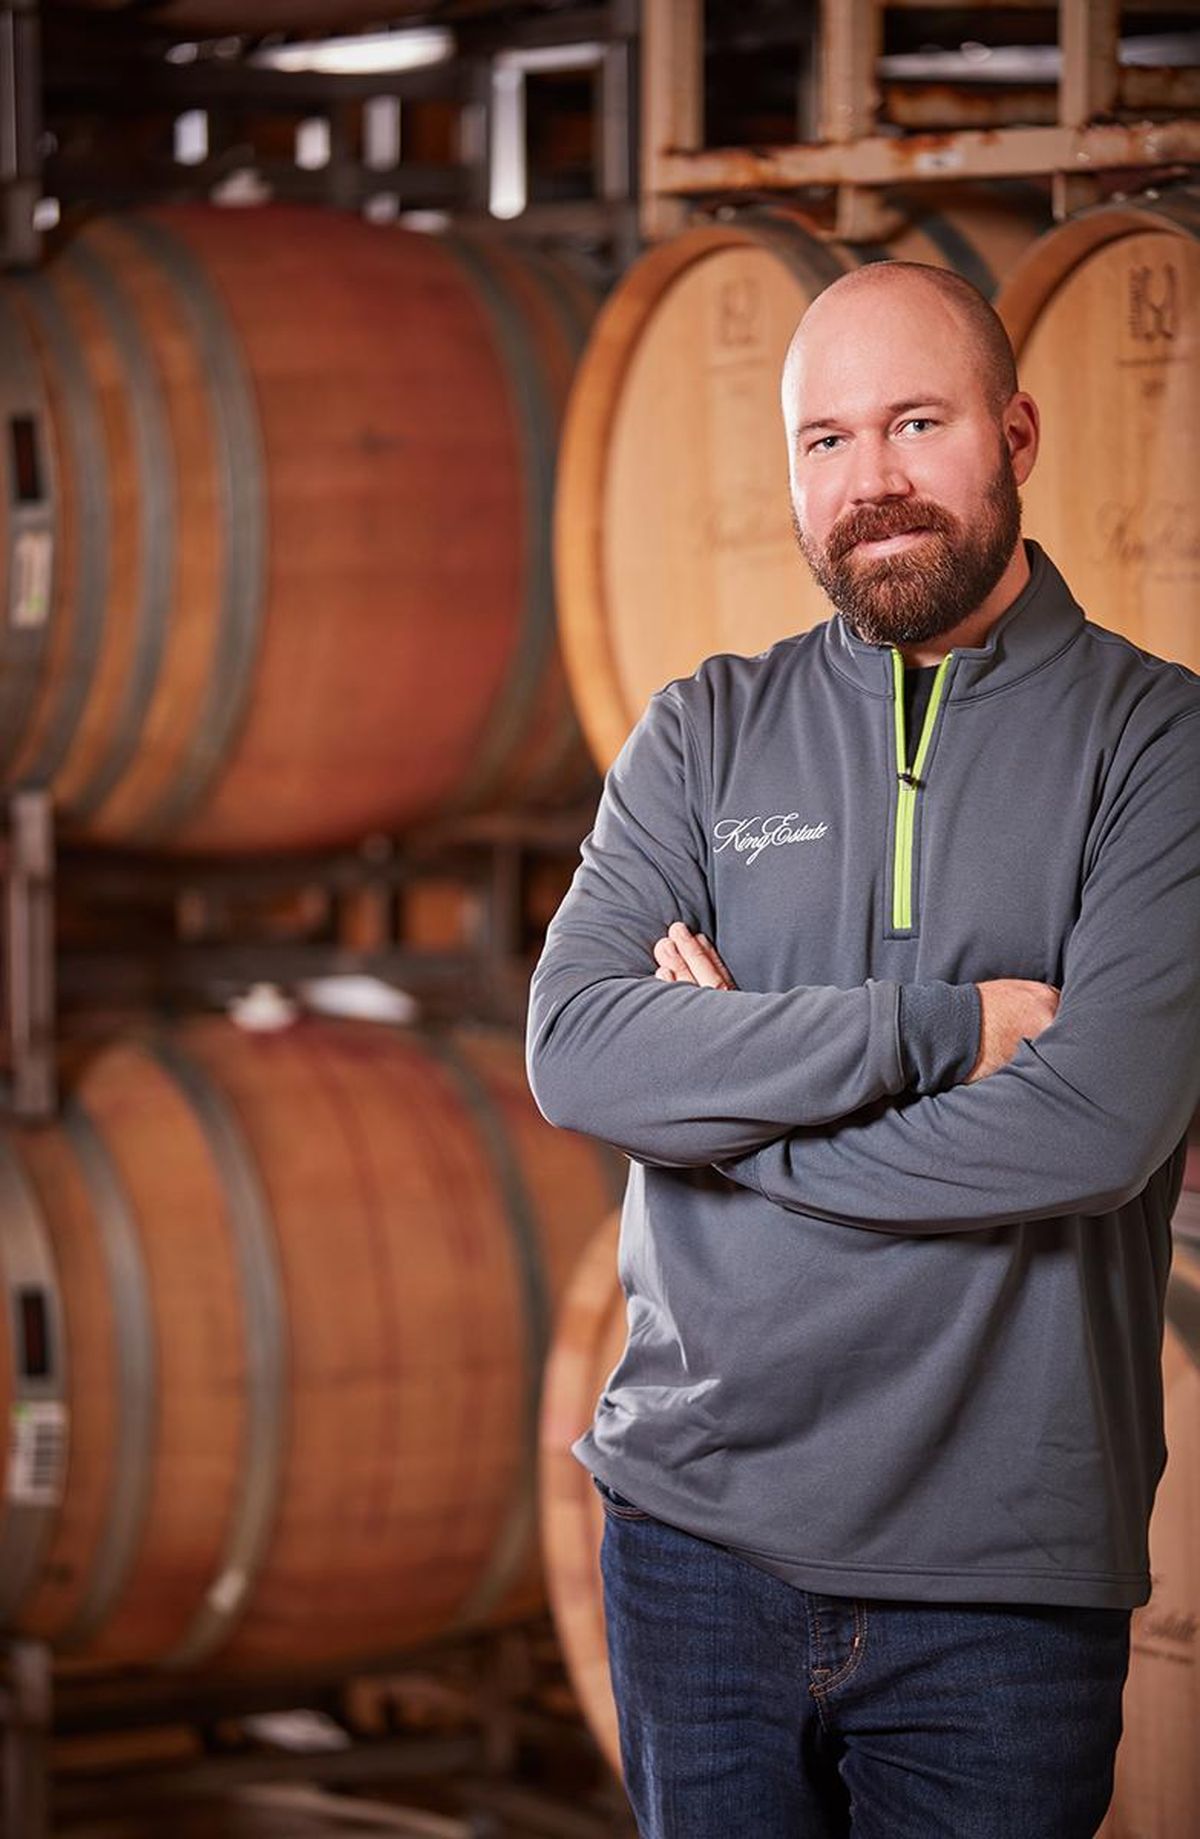 King Estate winemaker Brent Stone, with a science background at Washington State University and the University of Arkansas, helps oversee an annual production of pinot gris that now reaches 200,000 cases. (Sara Sanger / King Estate)